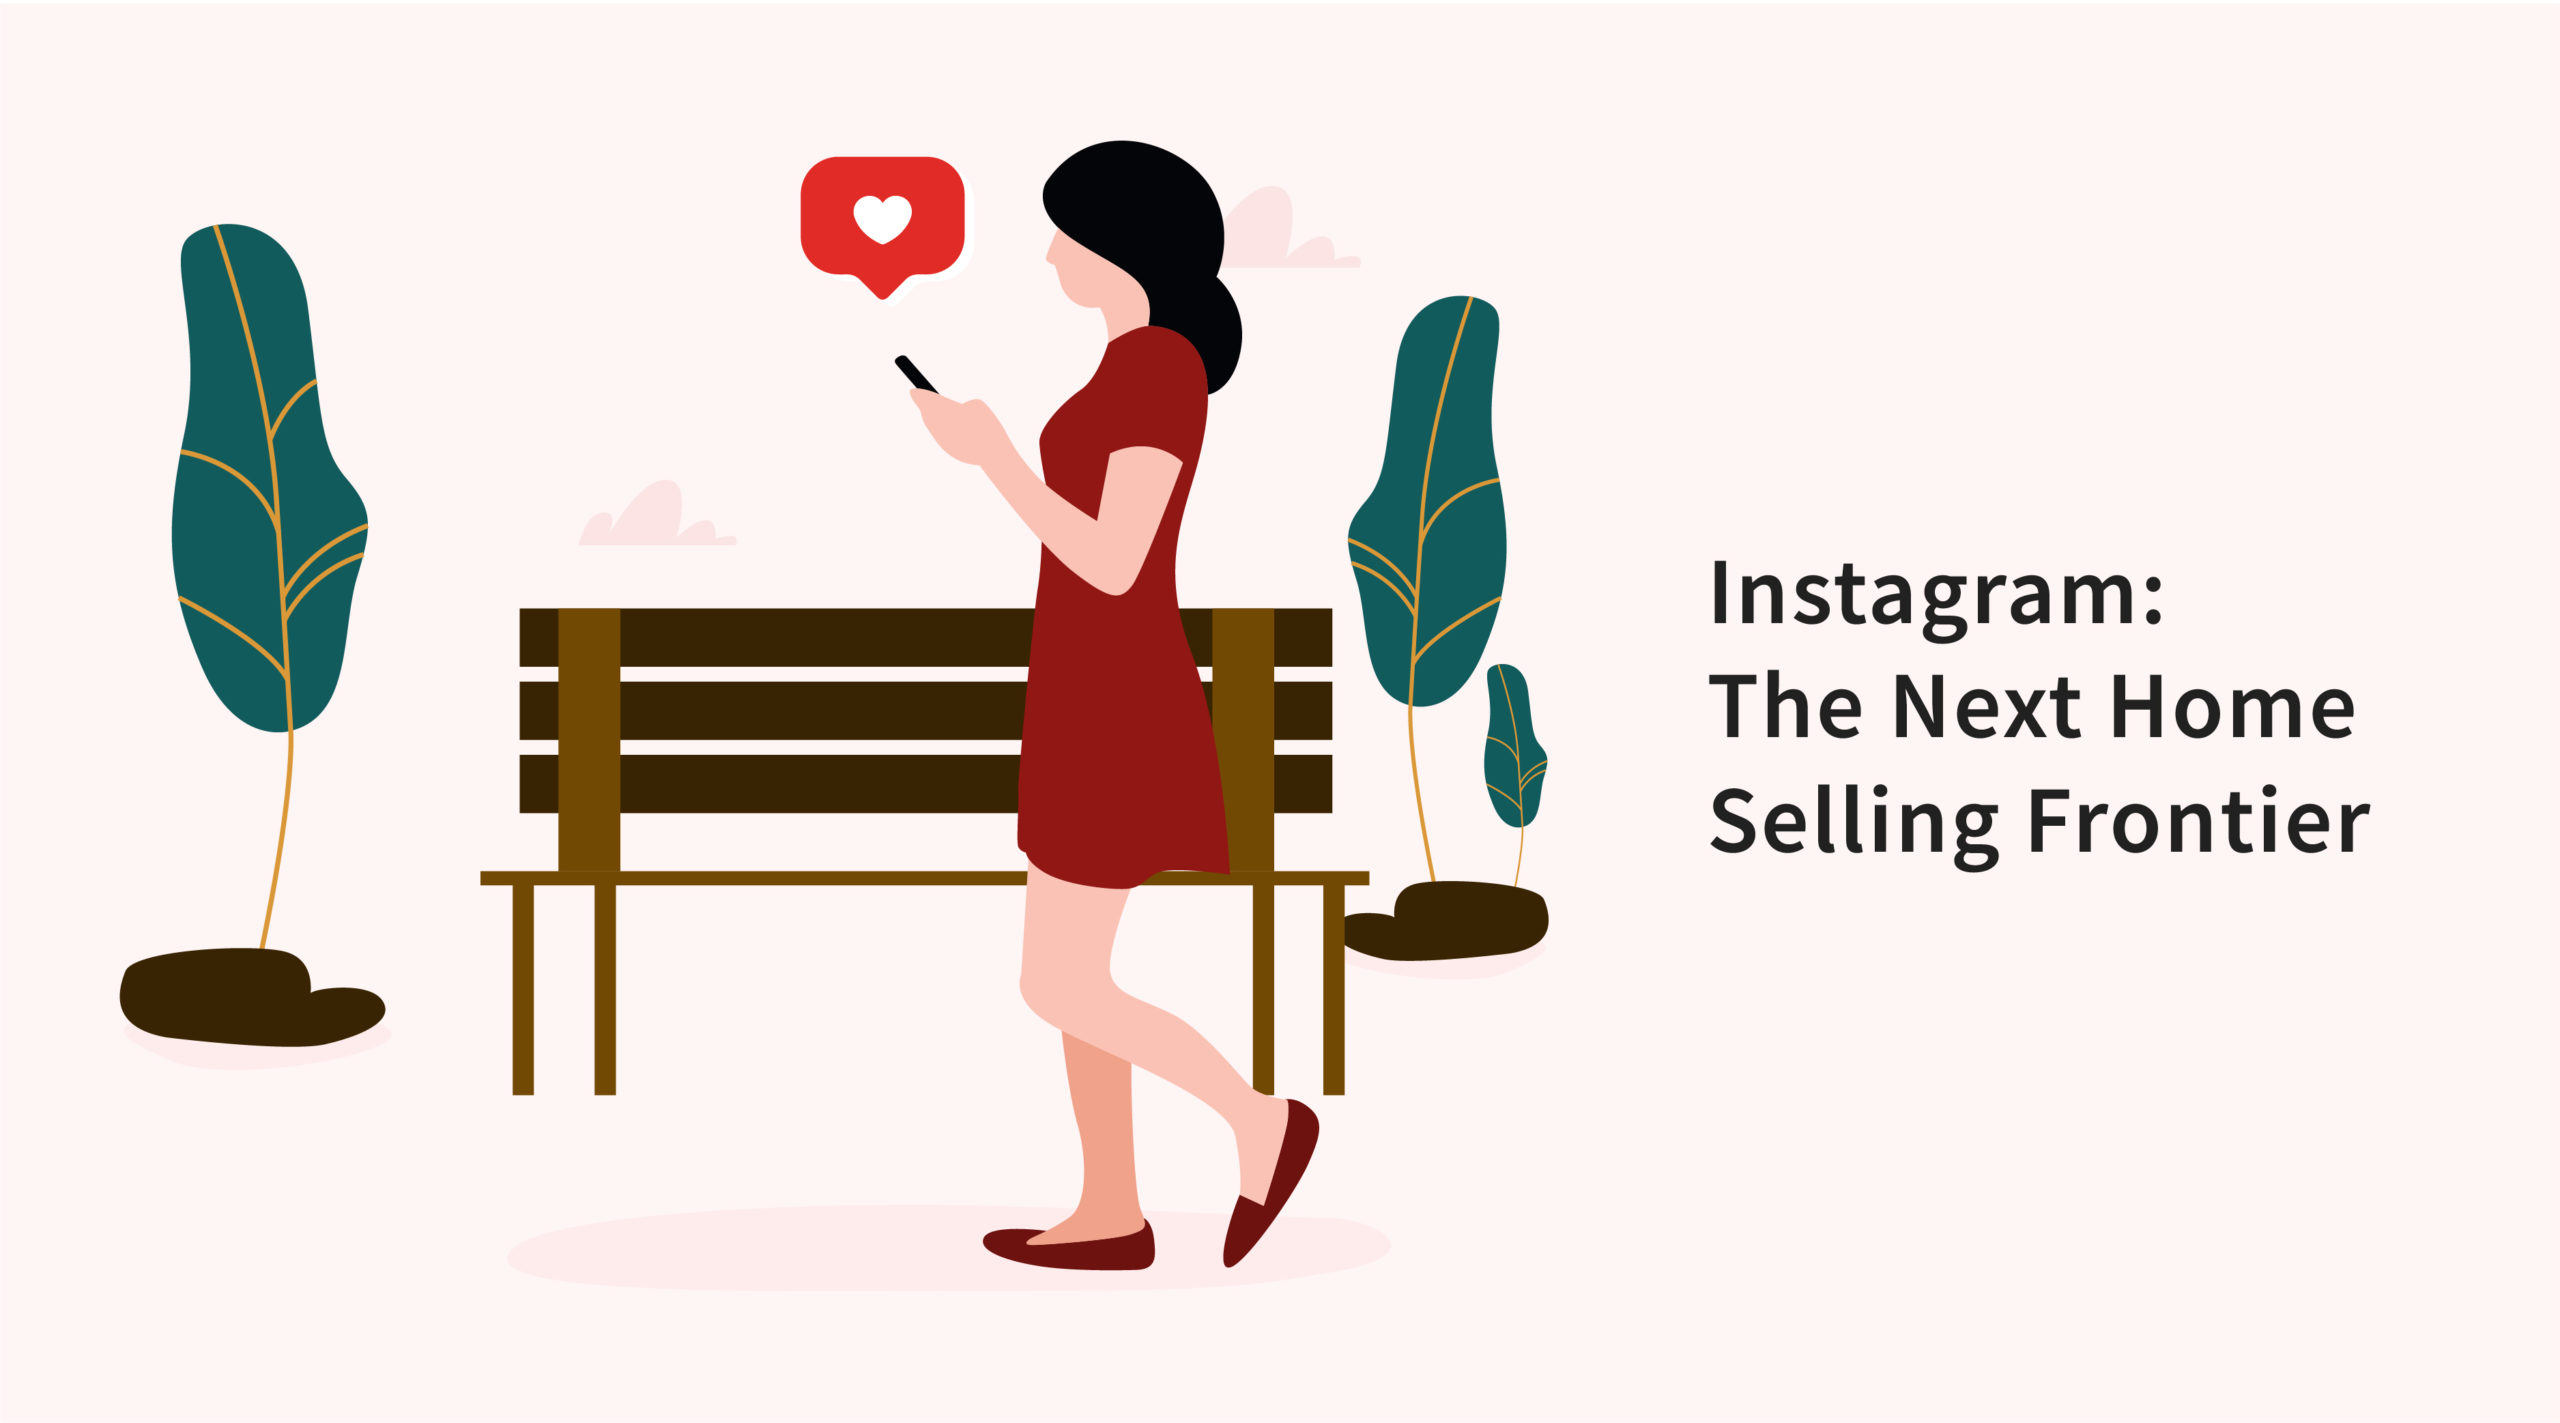 Instagram: The Next Home Selling Frontier